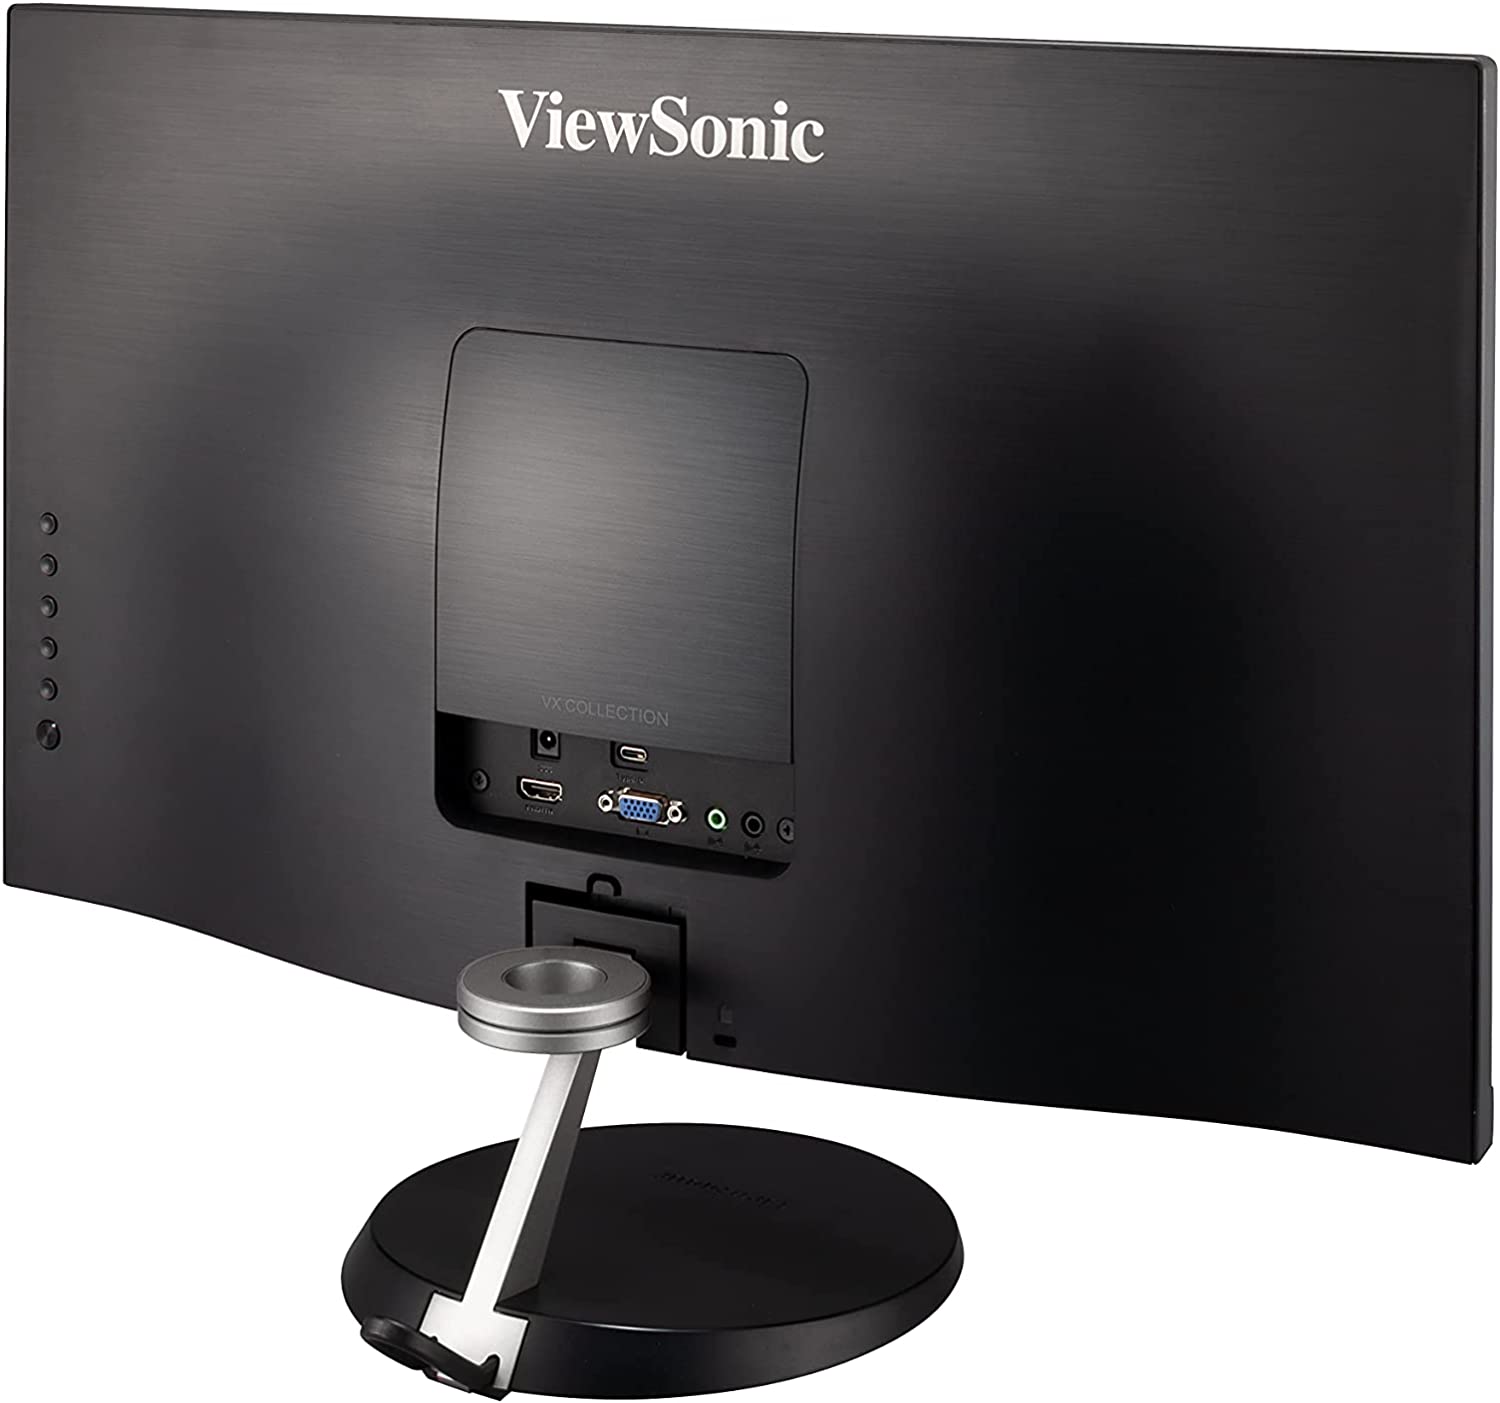 ViewSonic VX2485-MHU-S 24" 1080p USB 3.2 Type C and FreeSync Home and Office IPS Monitor - Certified Refurbished